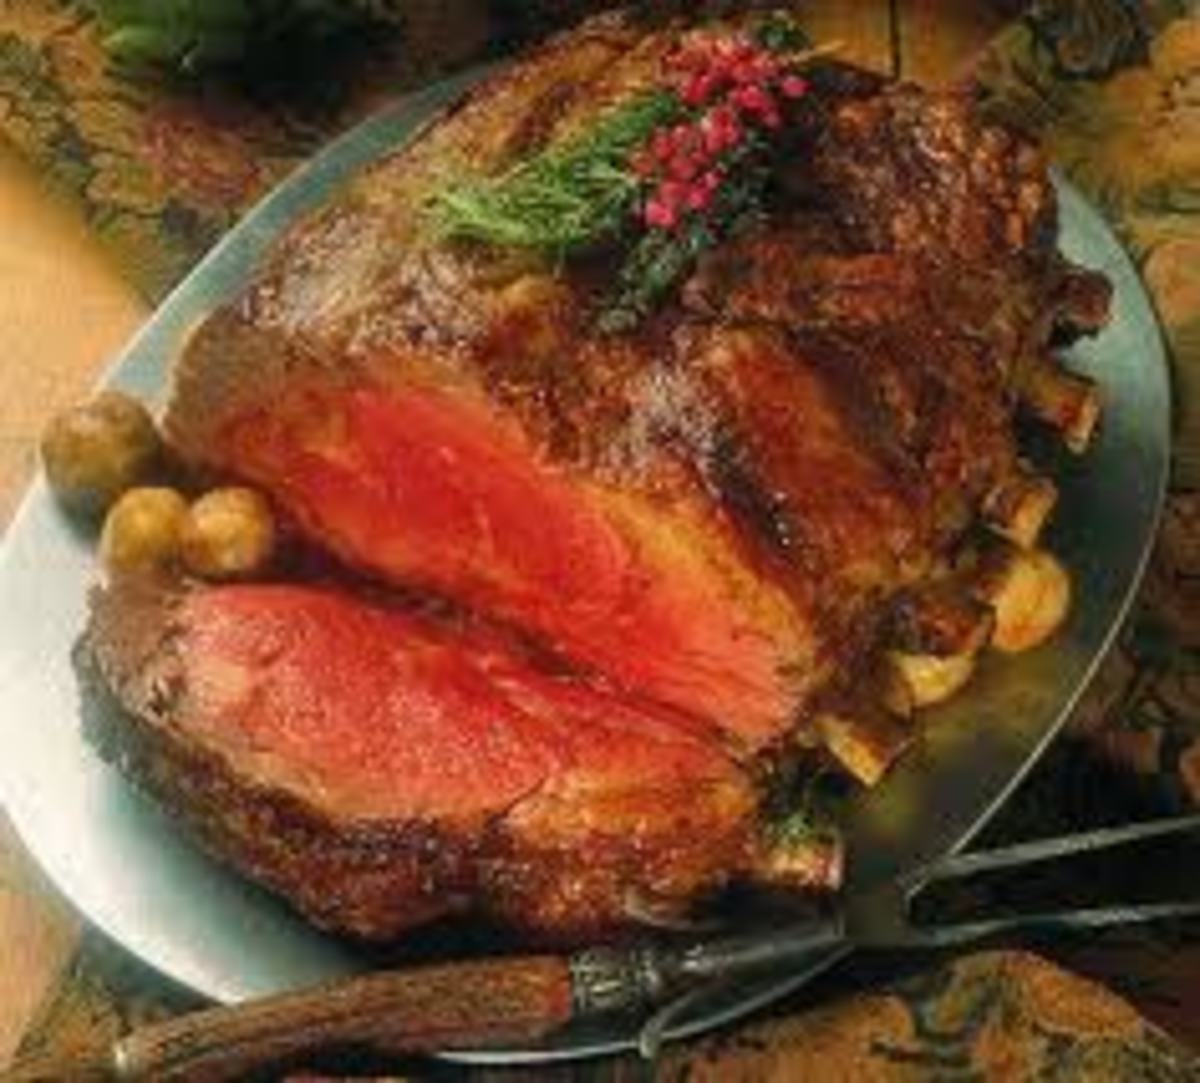 Picture of a holiday prime rib roast